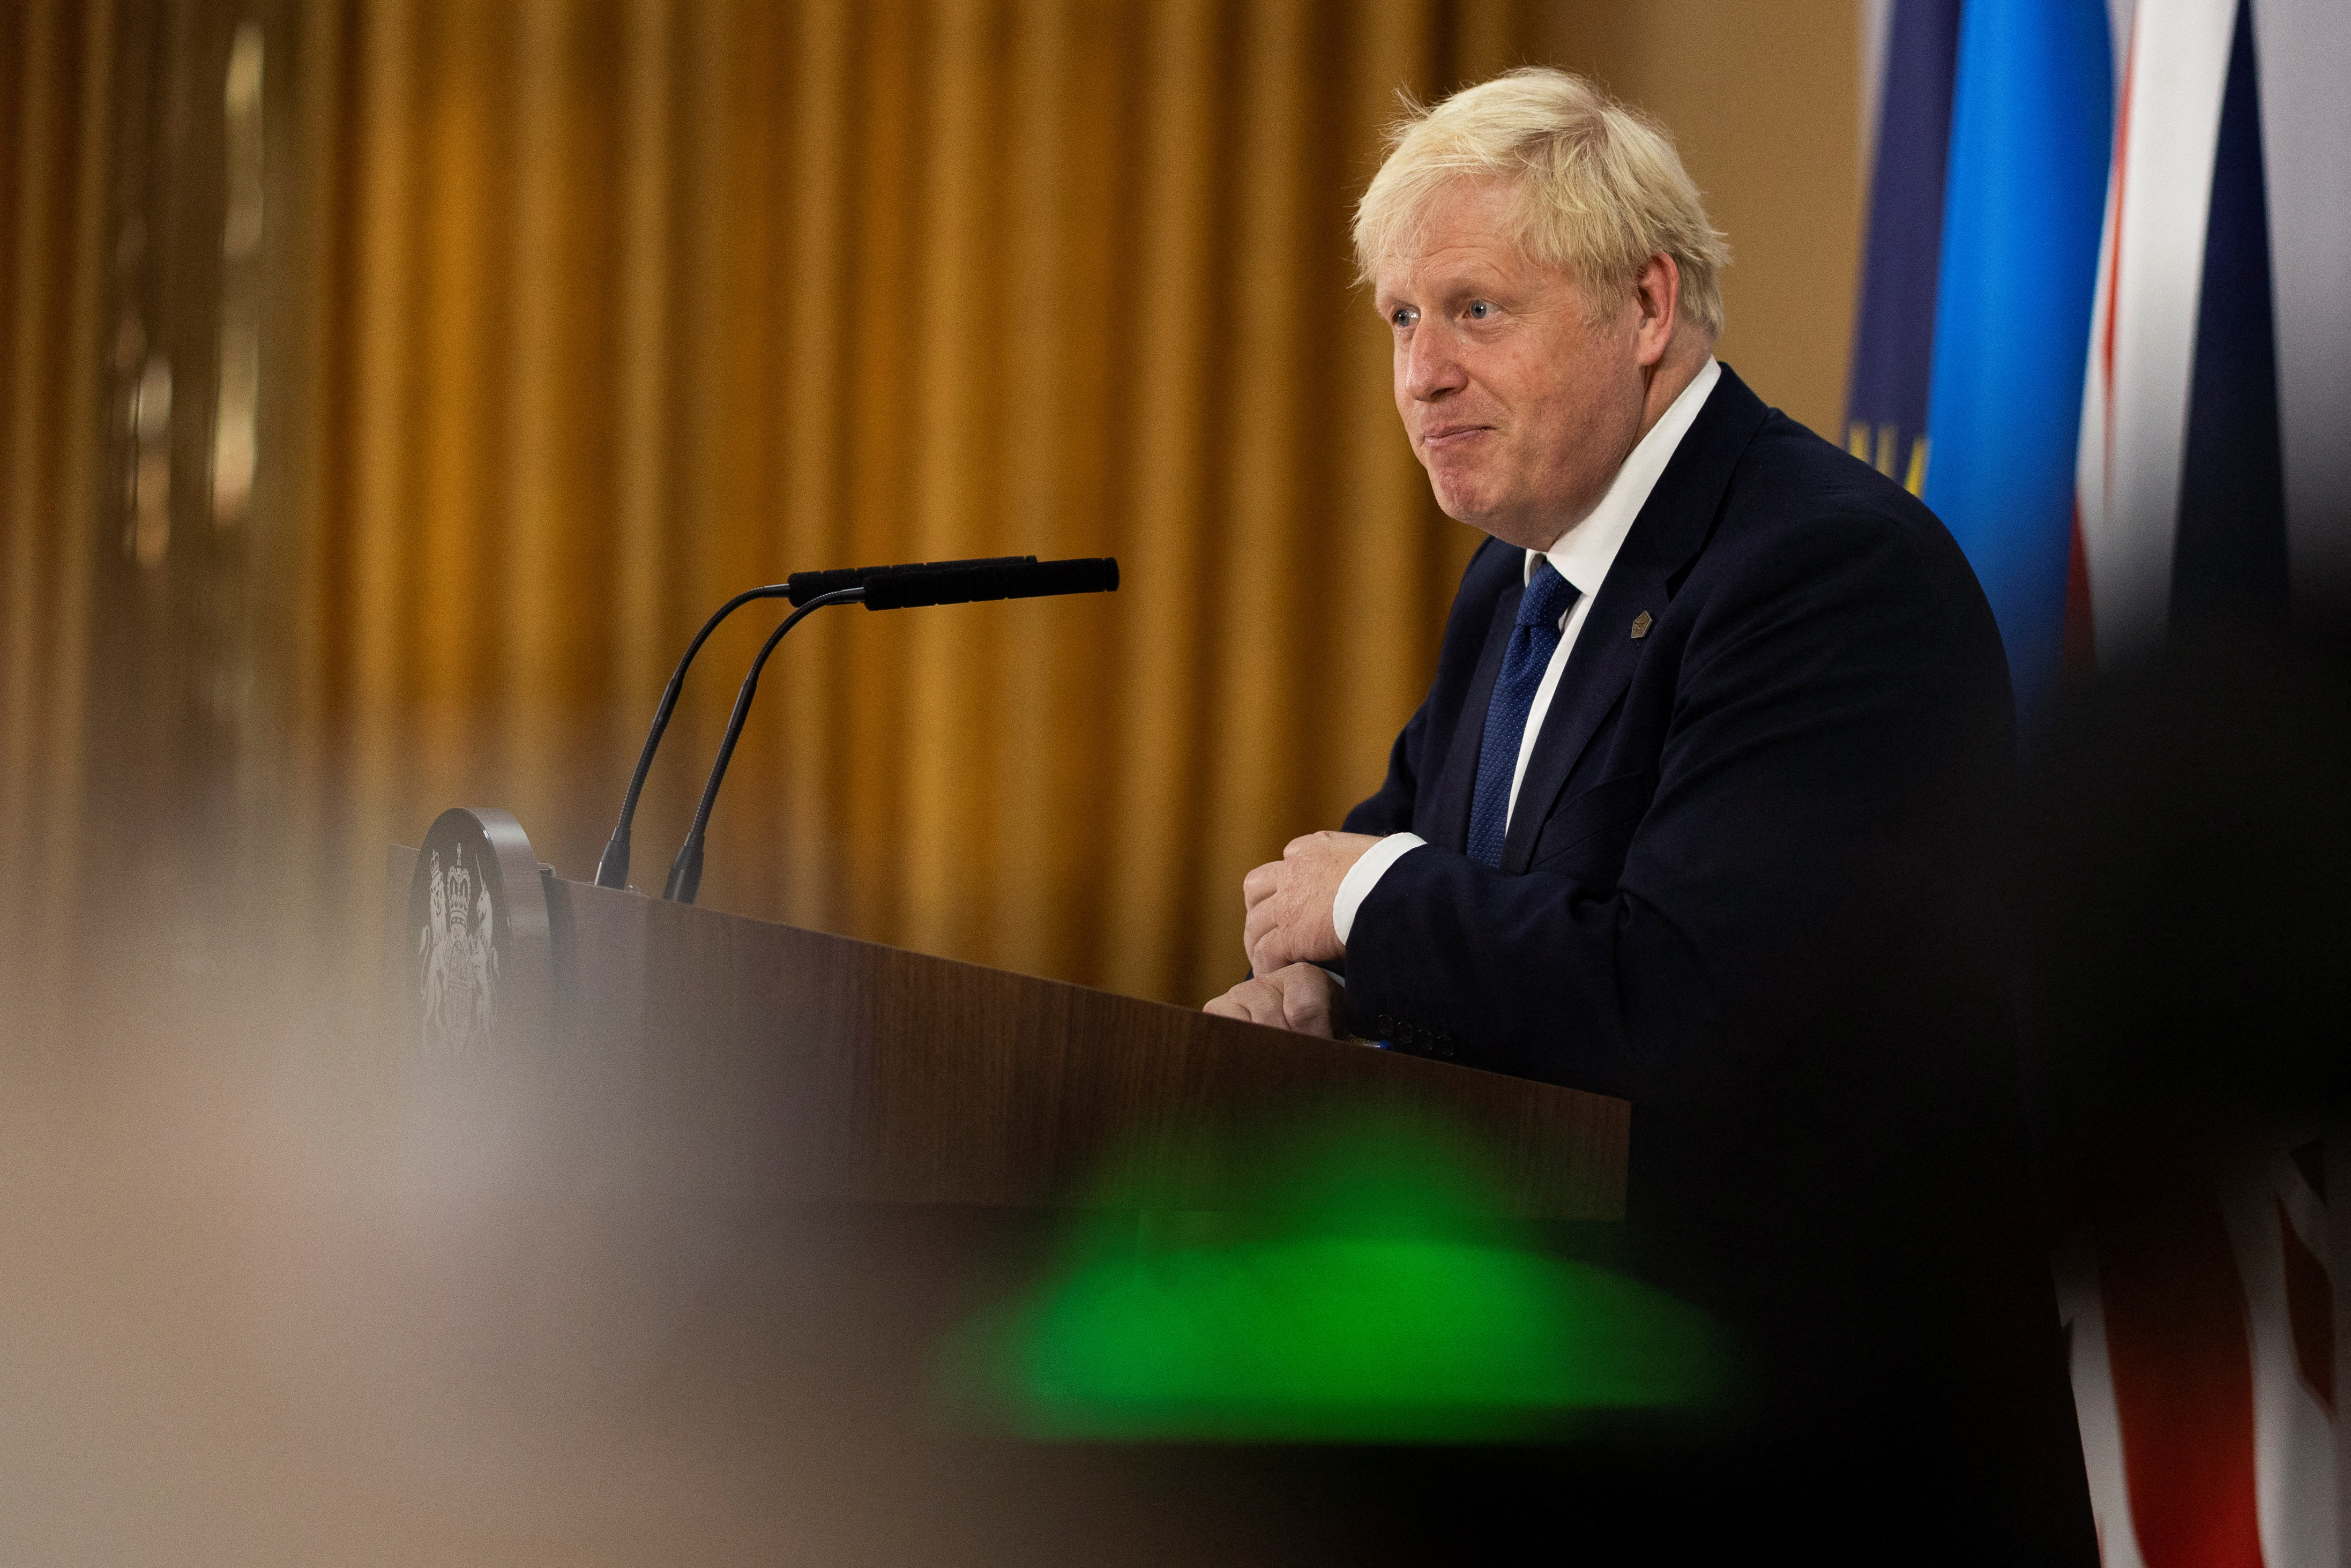 British Prime Minister Boris Johnson attends a news conference during the Commonwealth Heads of Government Meeting (CHOGM) at Lemigo Hotel, in Kigali